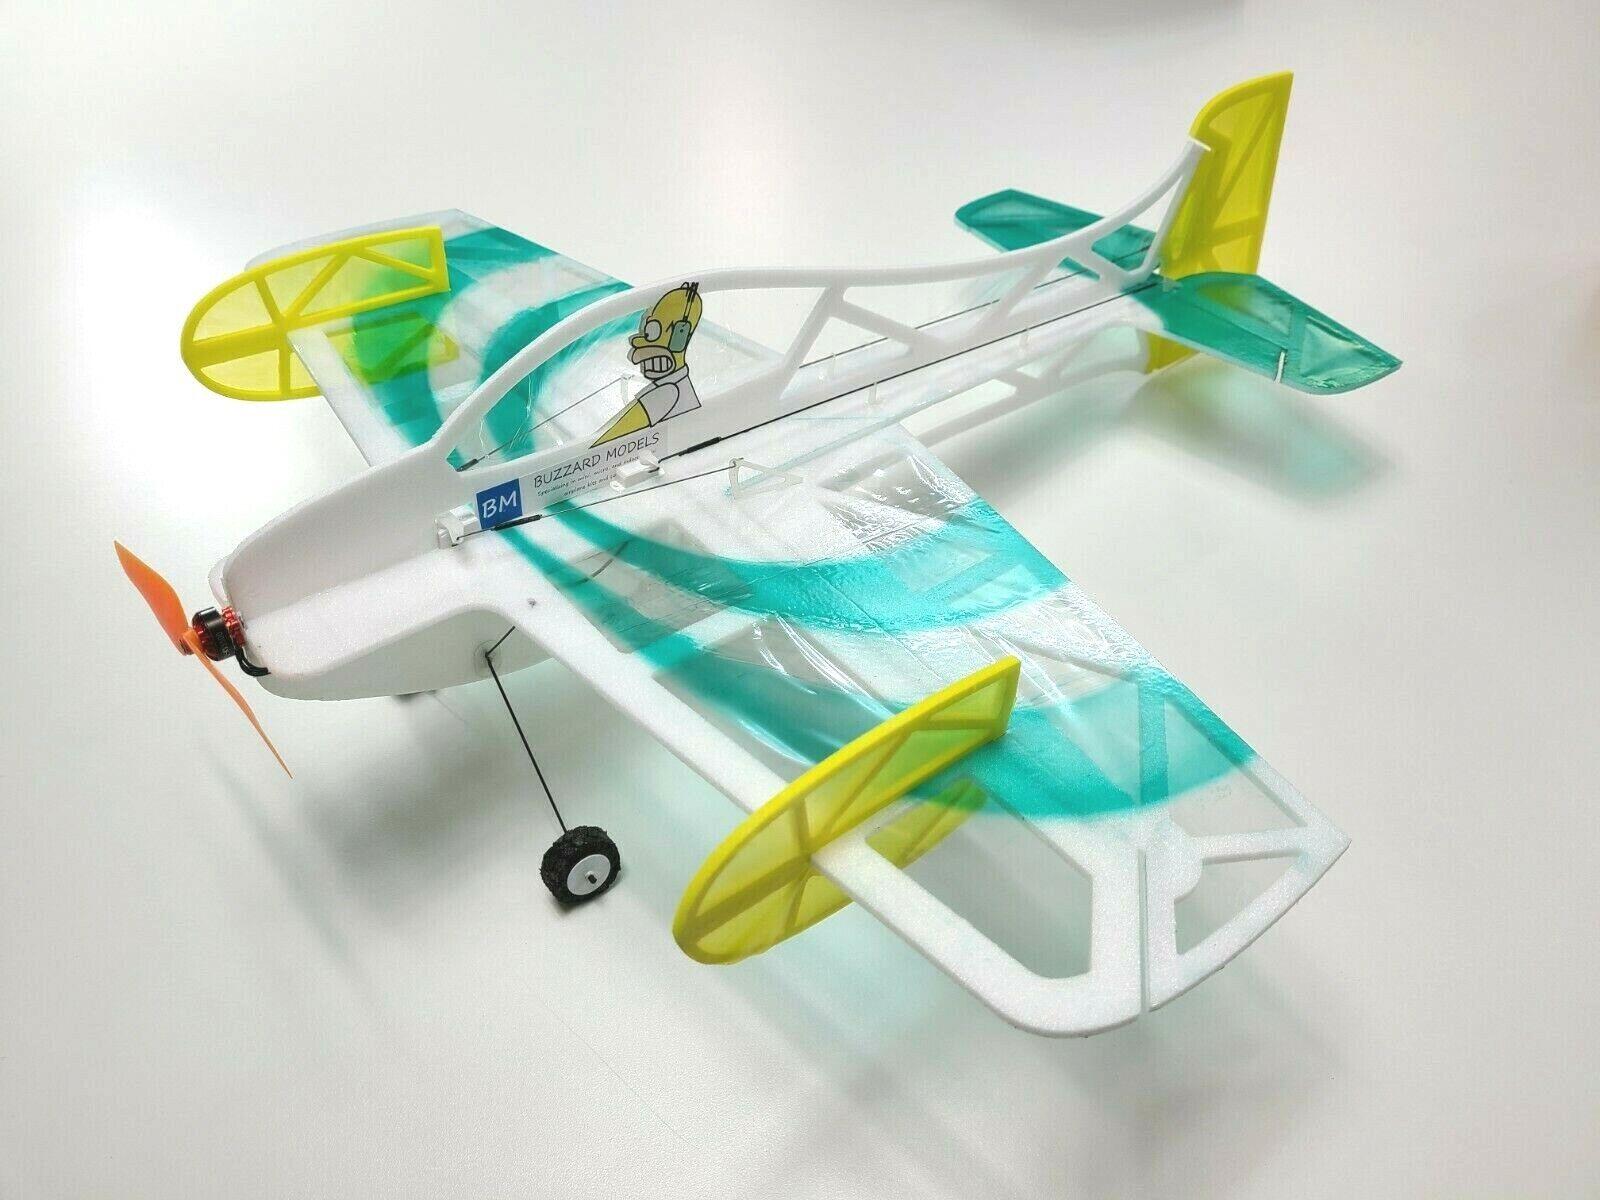 Indoor Rc Plane: Shop the latest indoor RC plane models from top brands